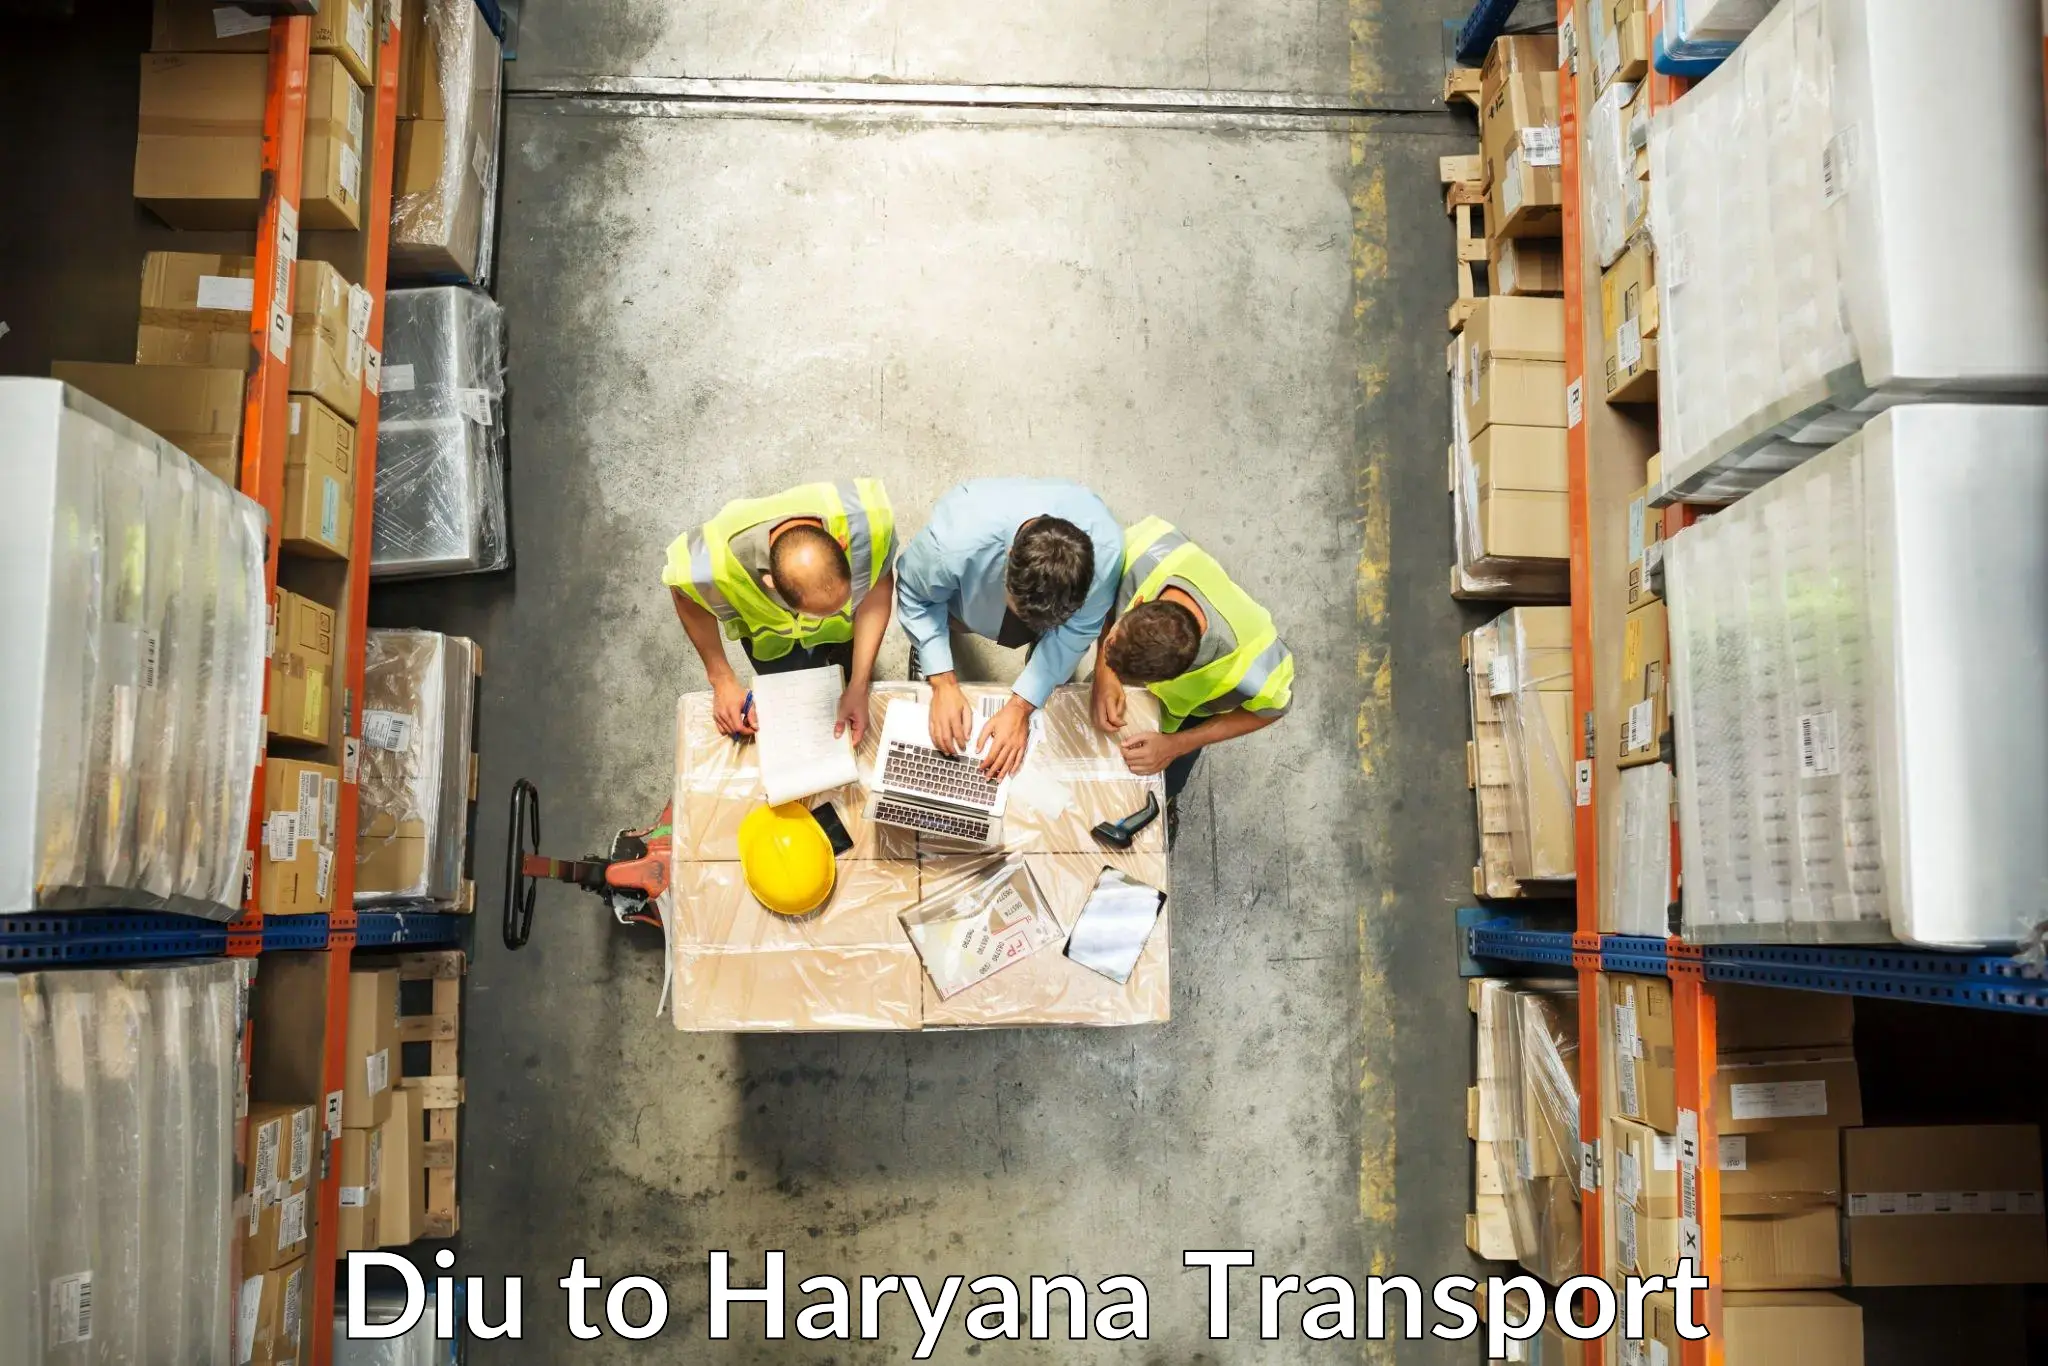 Commercial transport service Diu to Haryana